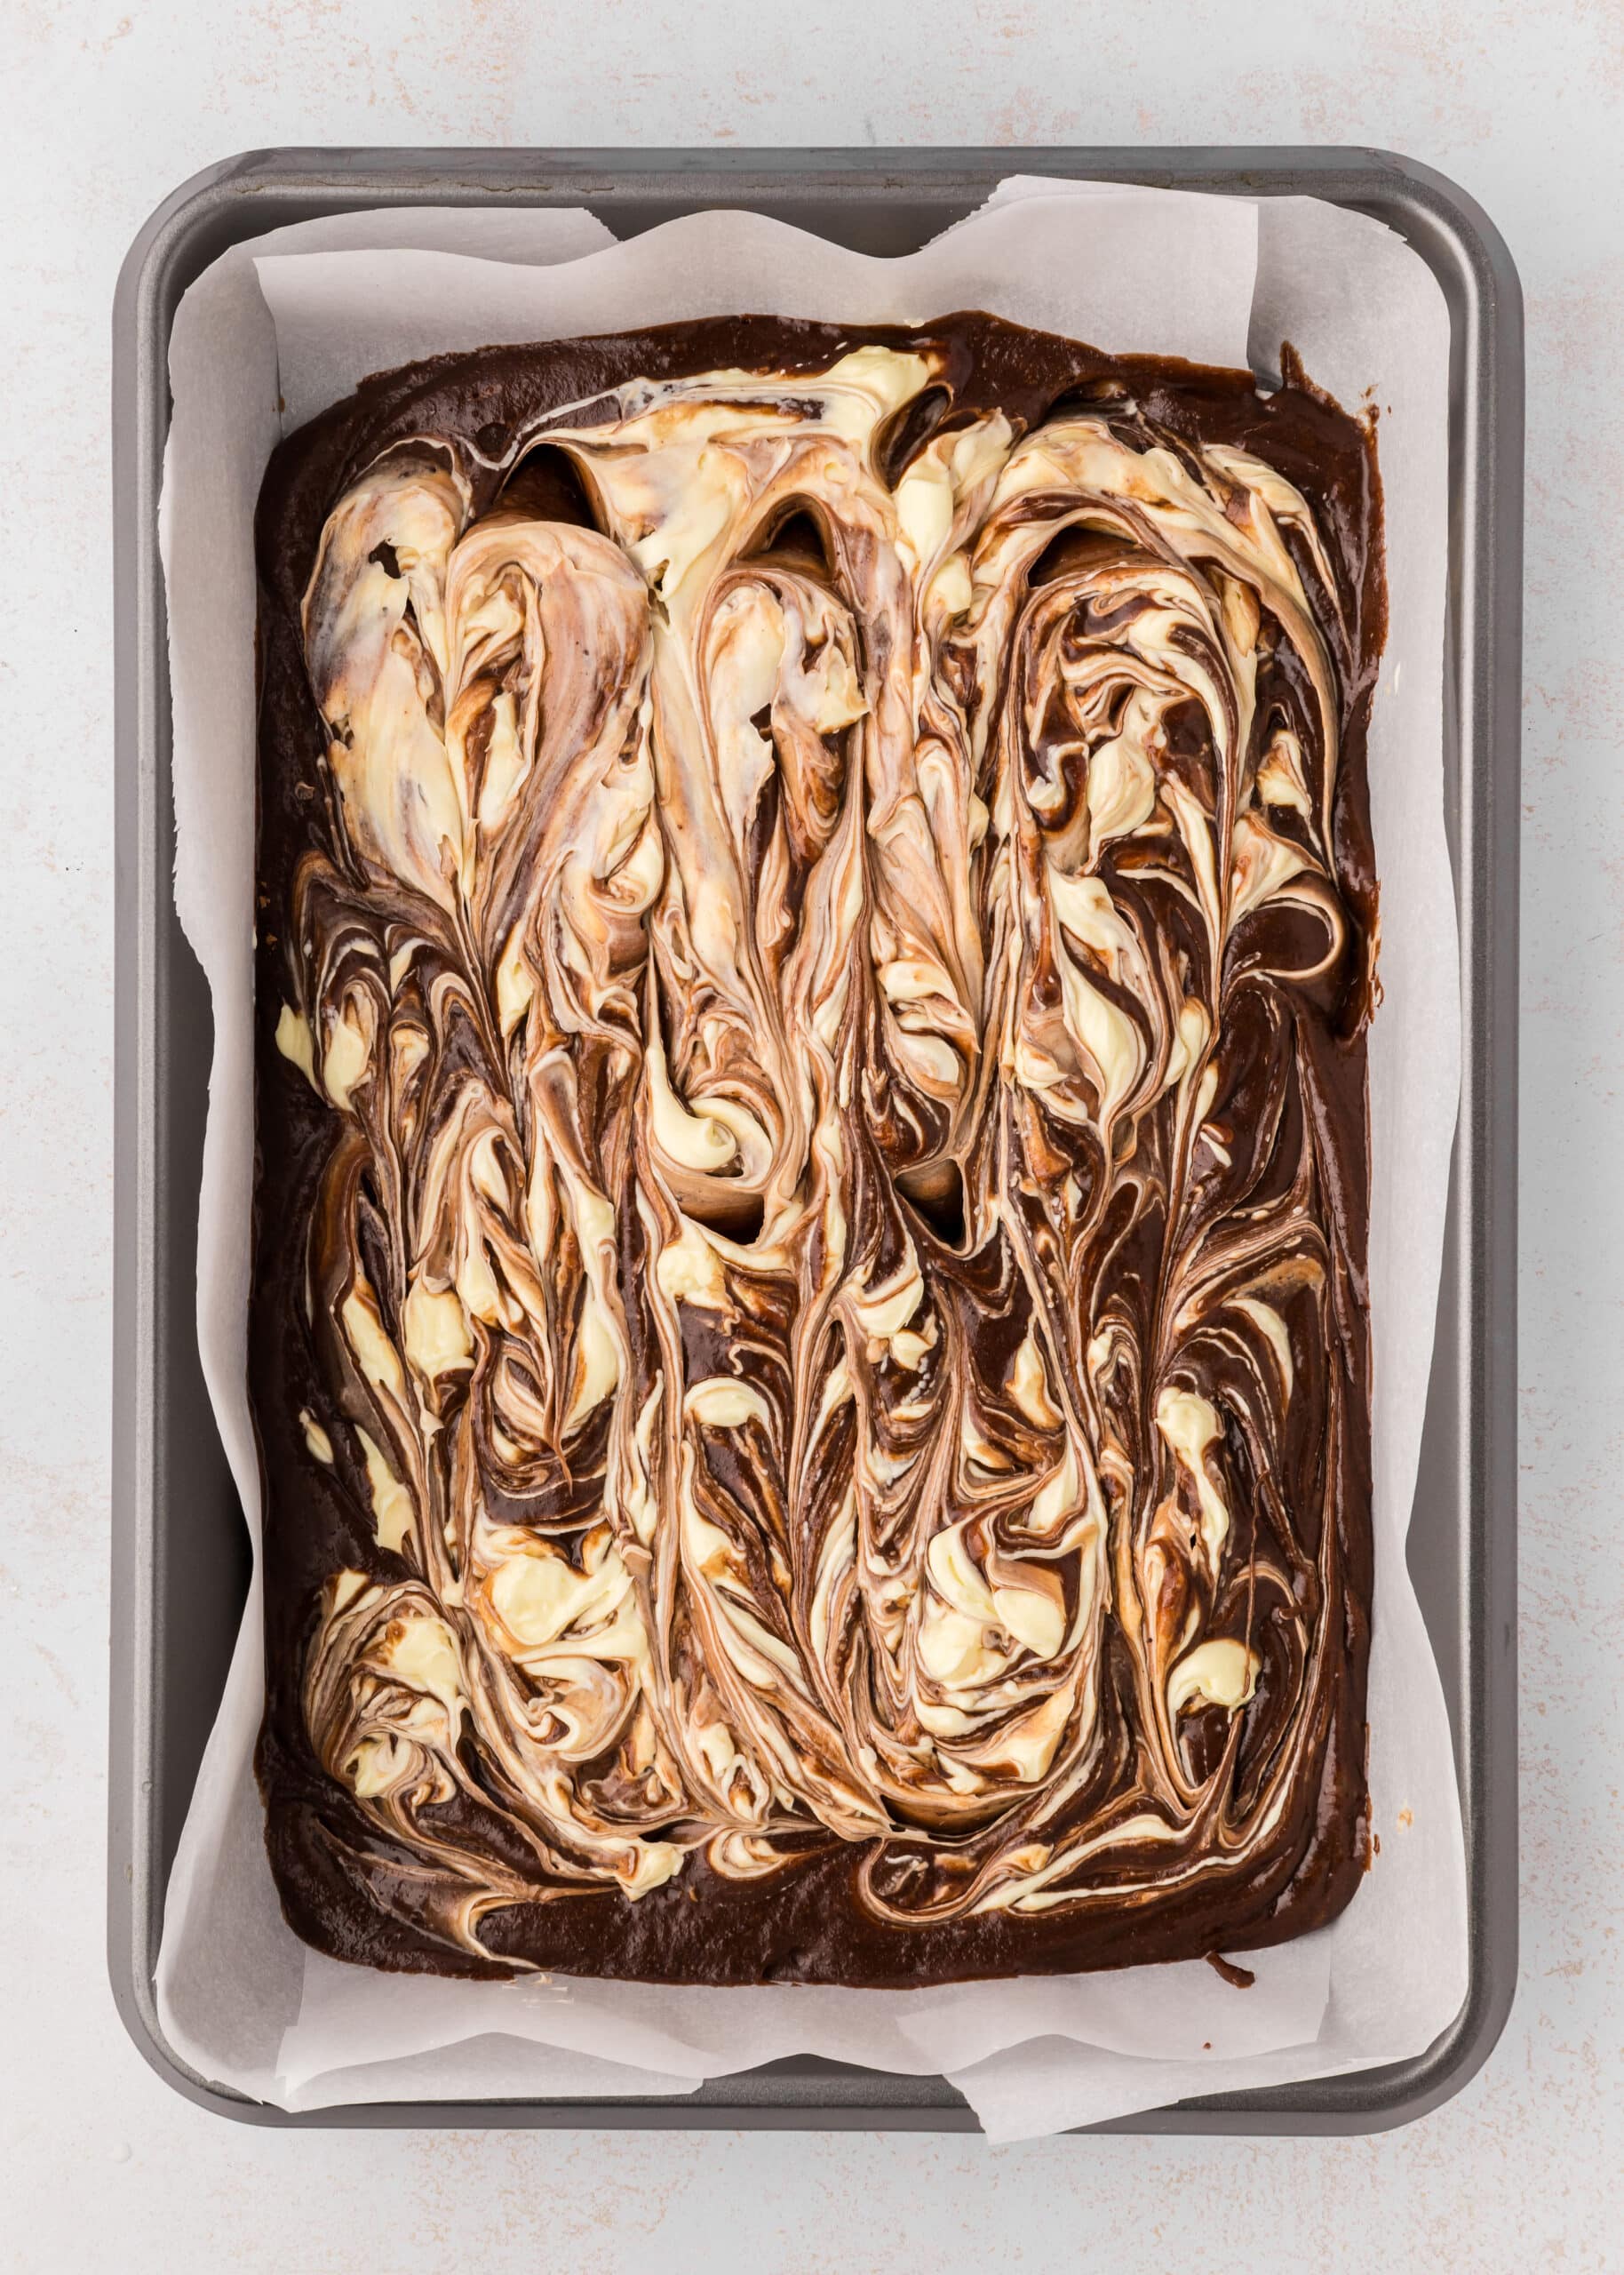 marble brownies with cream cheese swirl